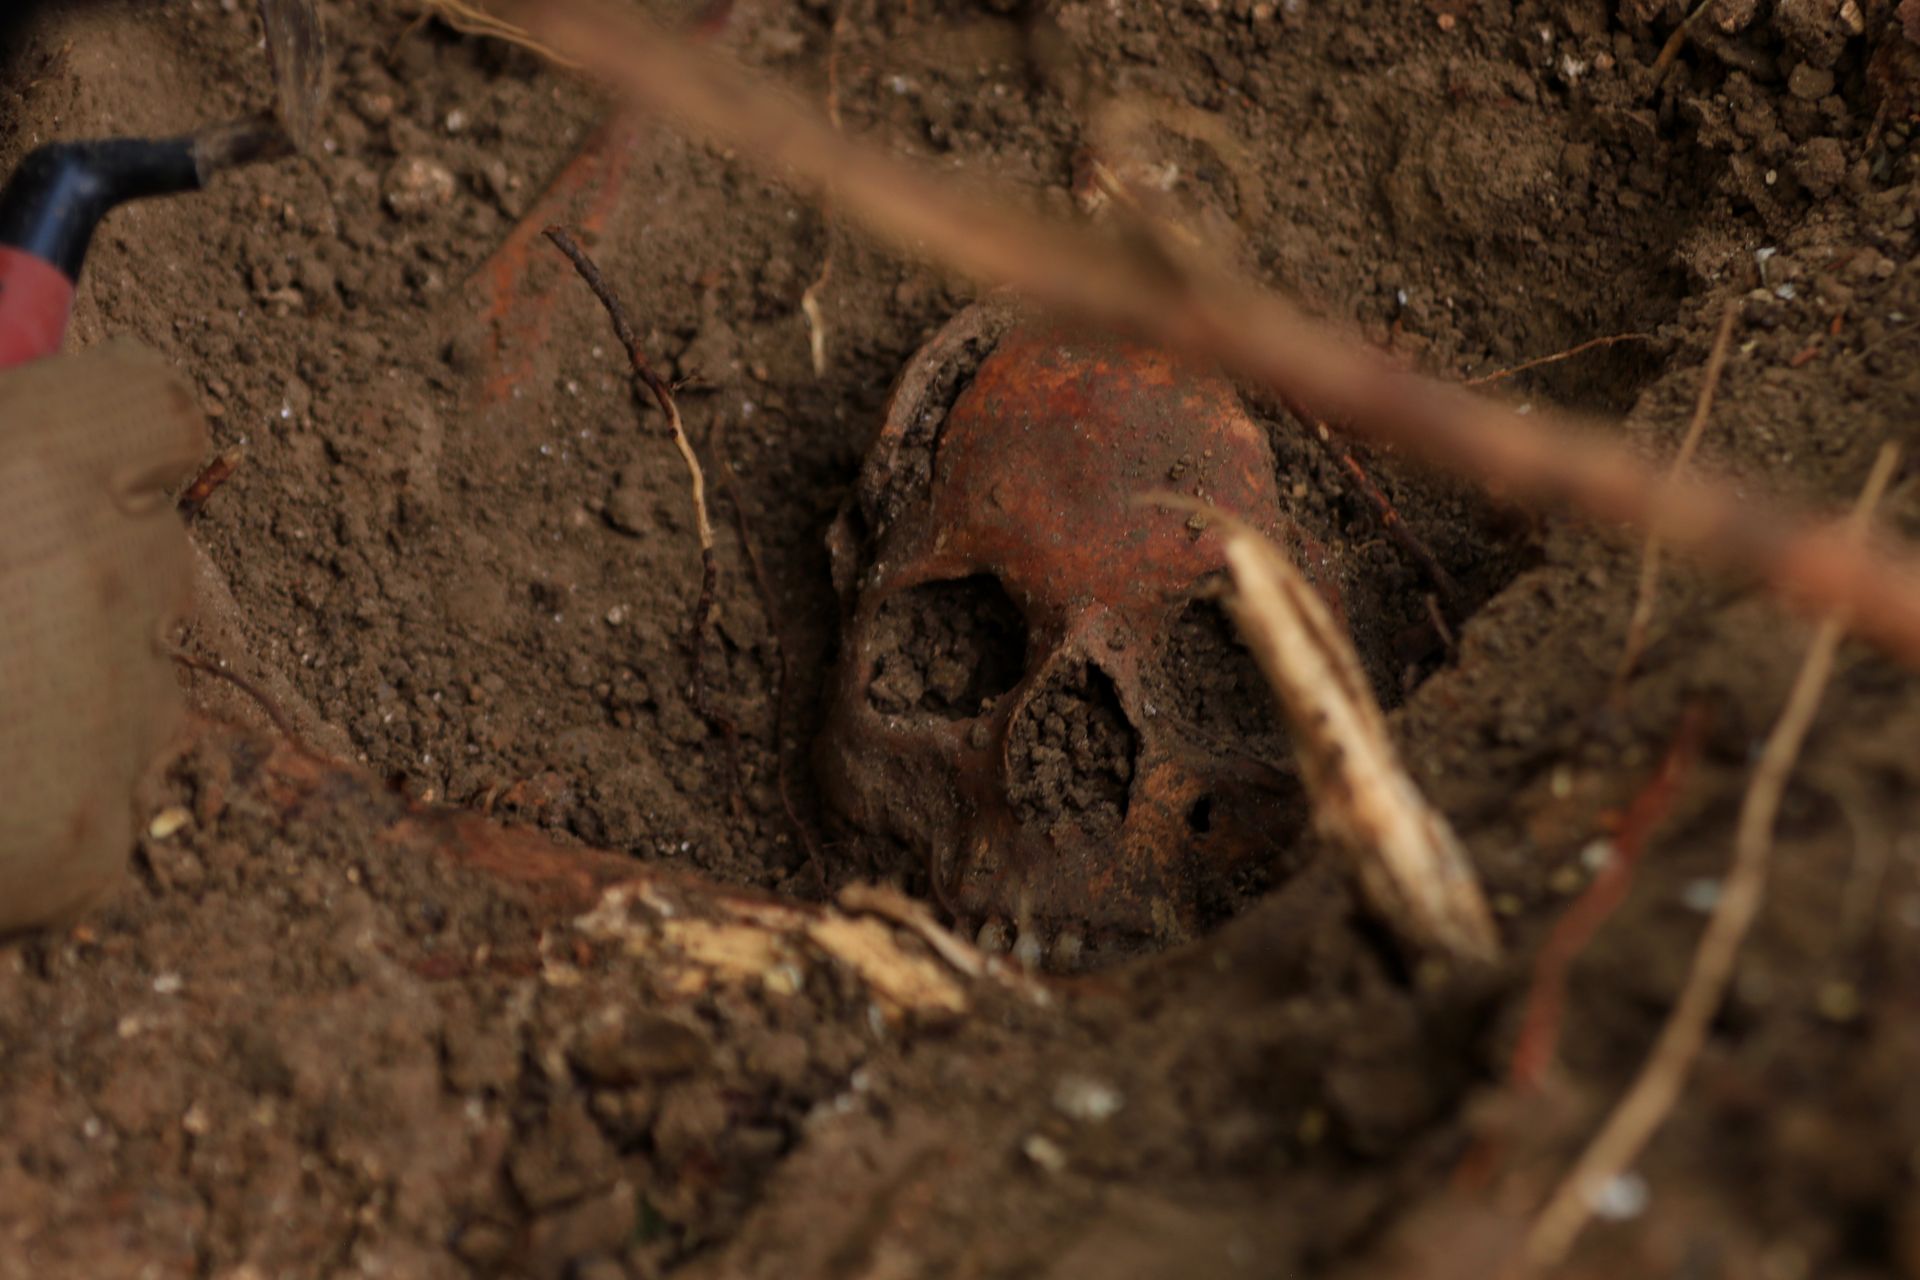 A New Dig Has Revealed Bodies From a WWII Massacre in Ukraine